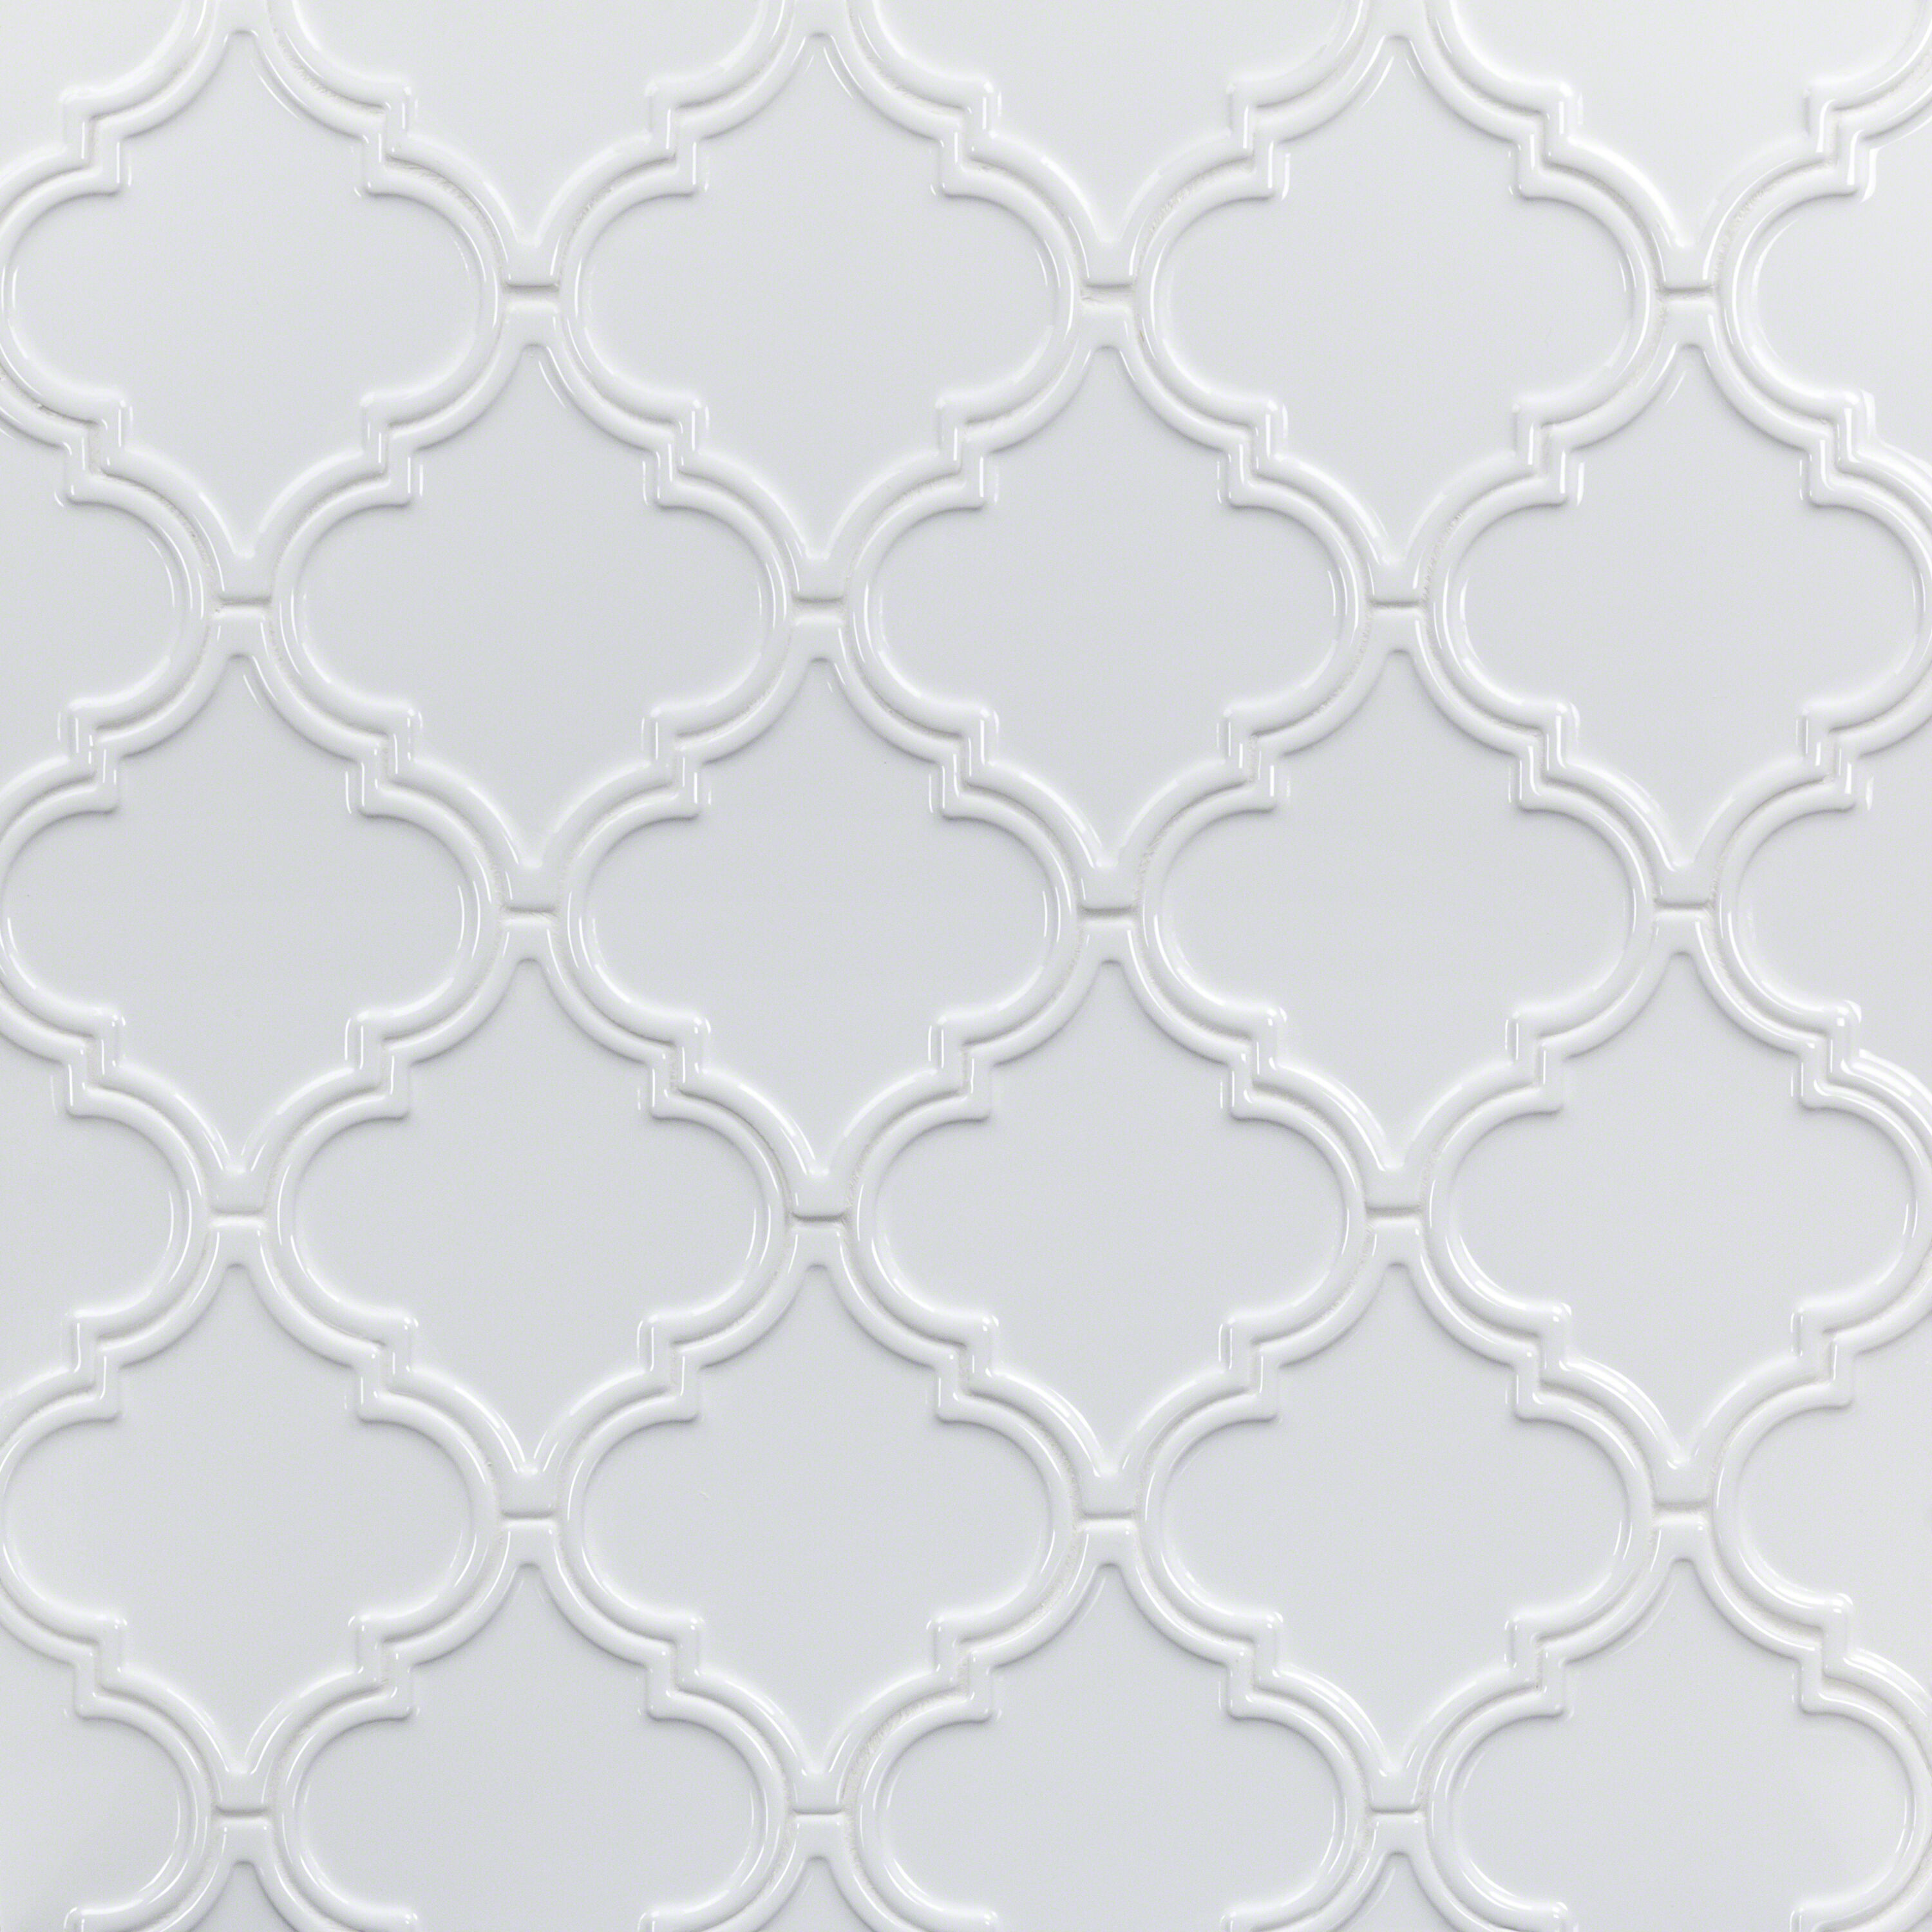 Artmore Tile Labyrinth White 6-in x 7-in Polished Ceramic Wall